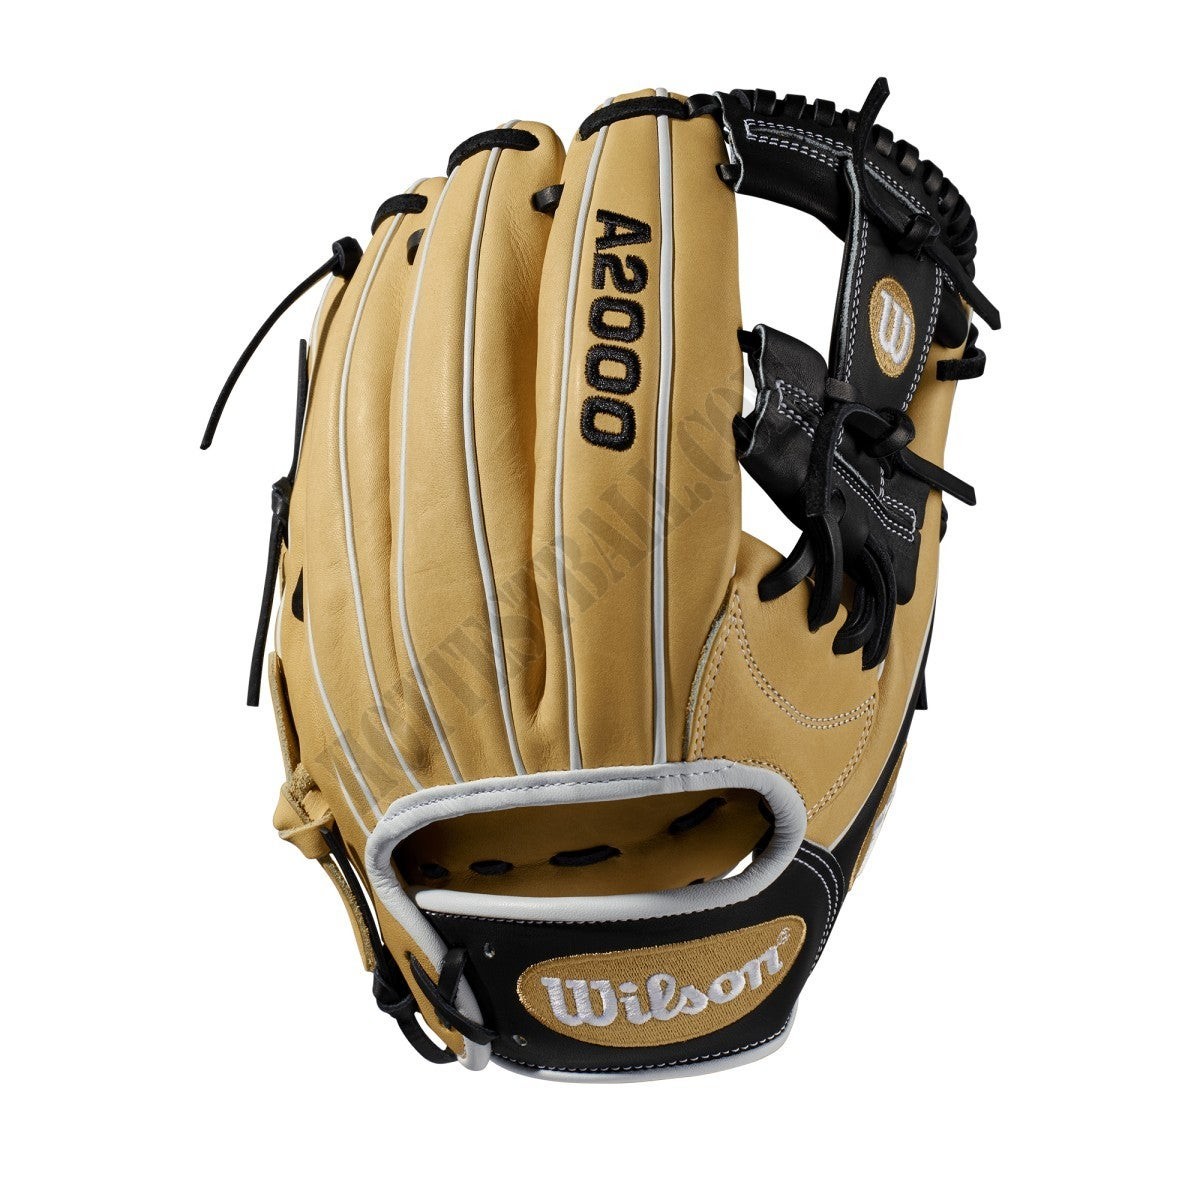 2019 A2000 1787 11.75" Infield Baseball Glove - Right Hand Throw ● Wilson Promotions - -1